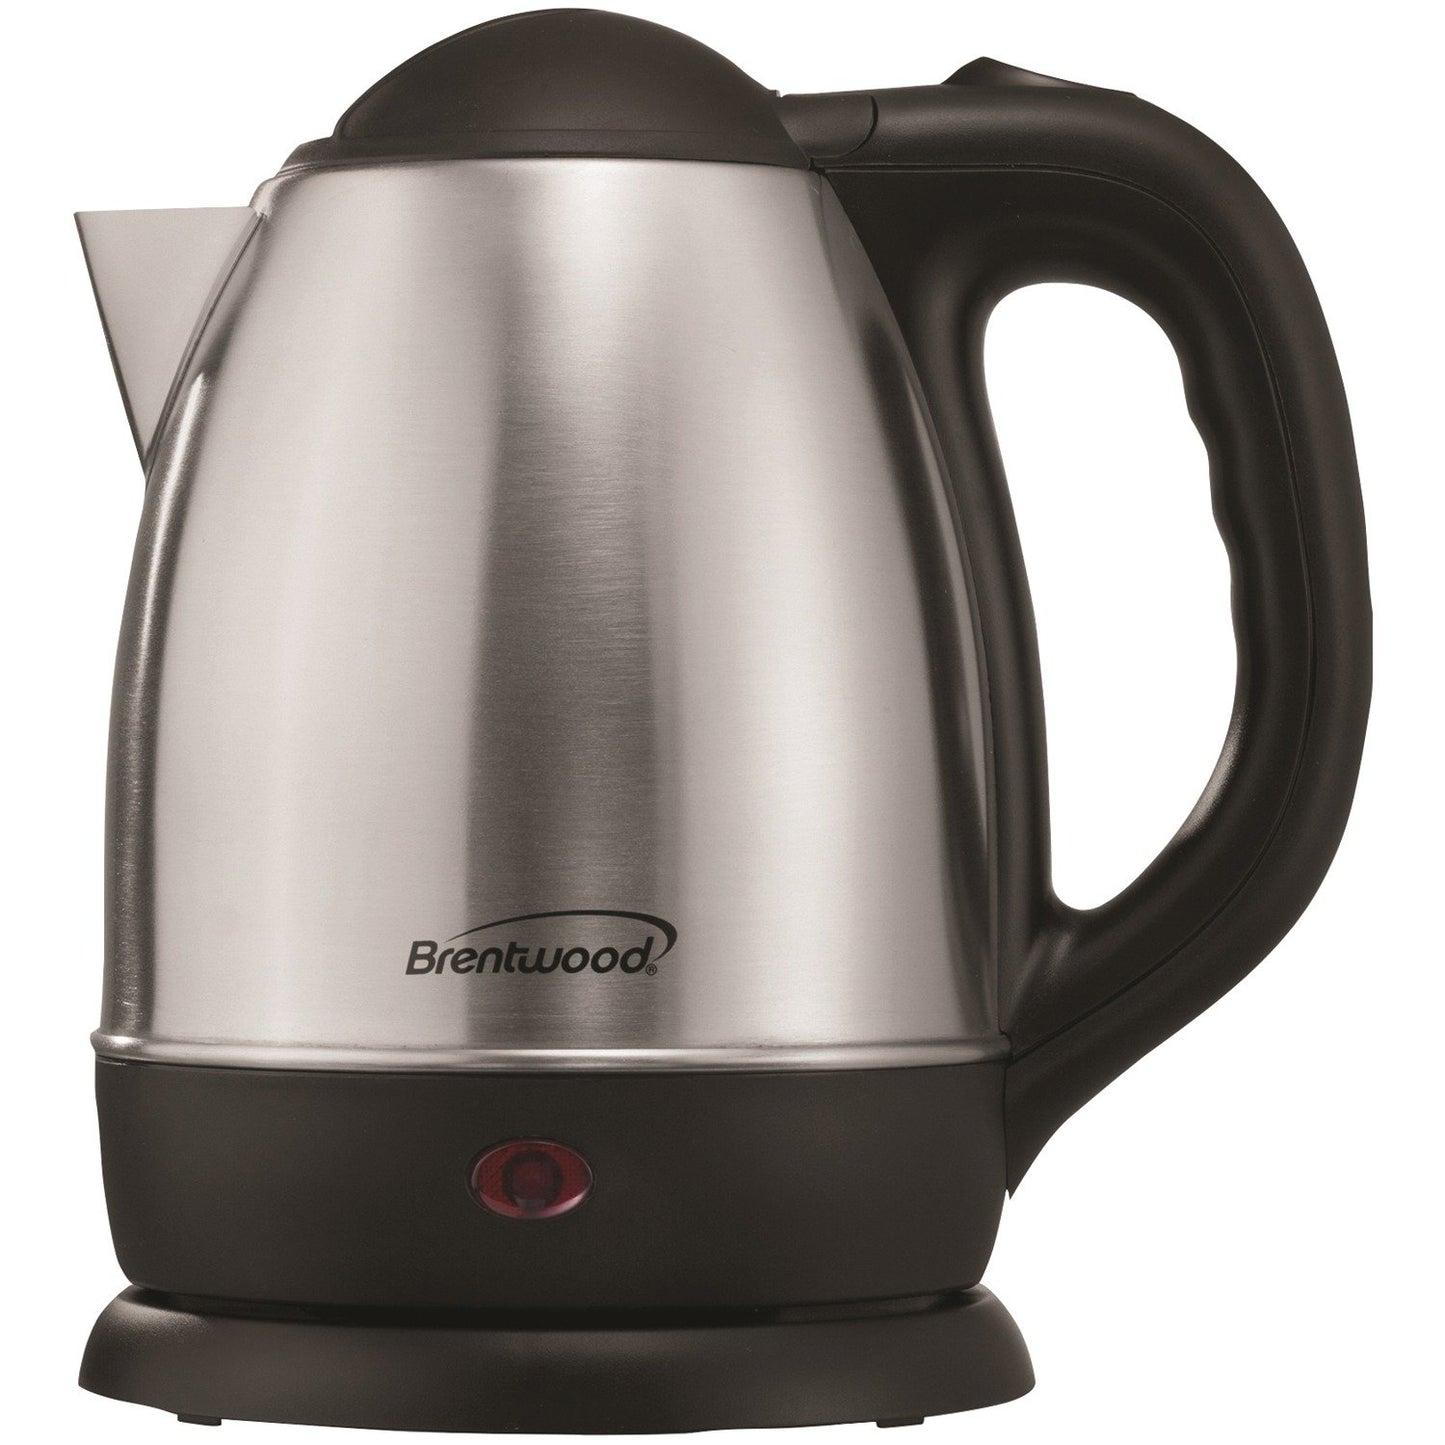 Brentwood Appl. KT-1770 1.2L Stainless Steel Cordless Electric Kettle